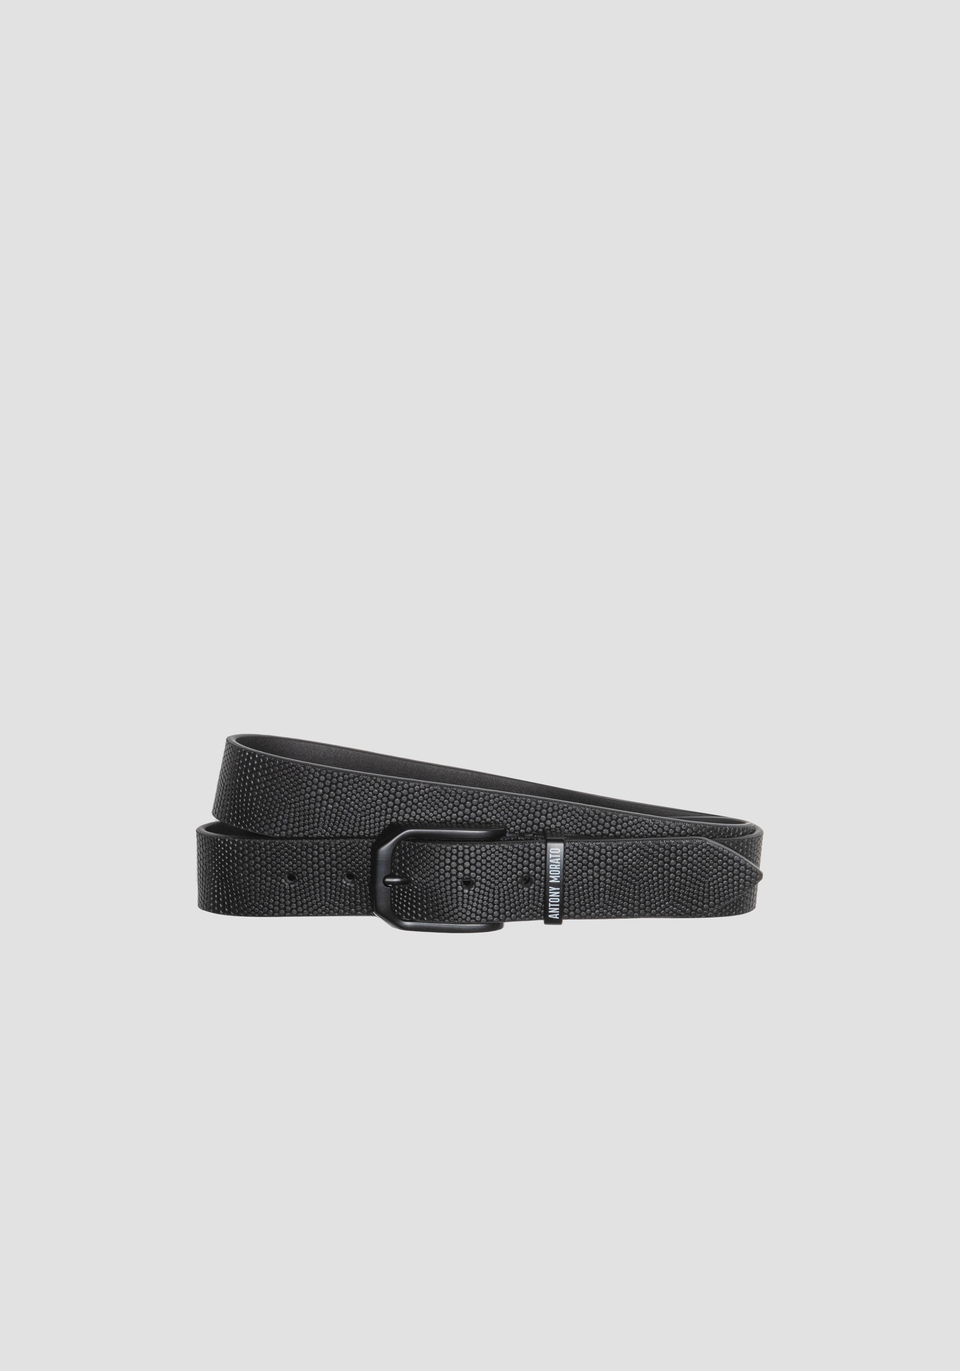 REAL LEATHER BELT WITH POLISHED BUCKLE - Antony Morato Online Shop